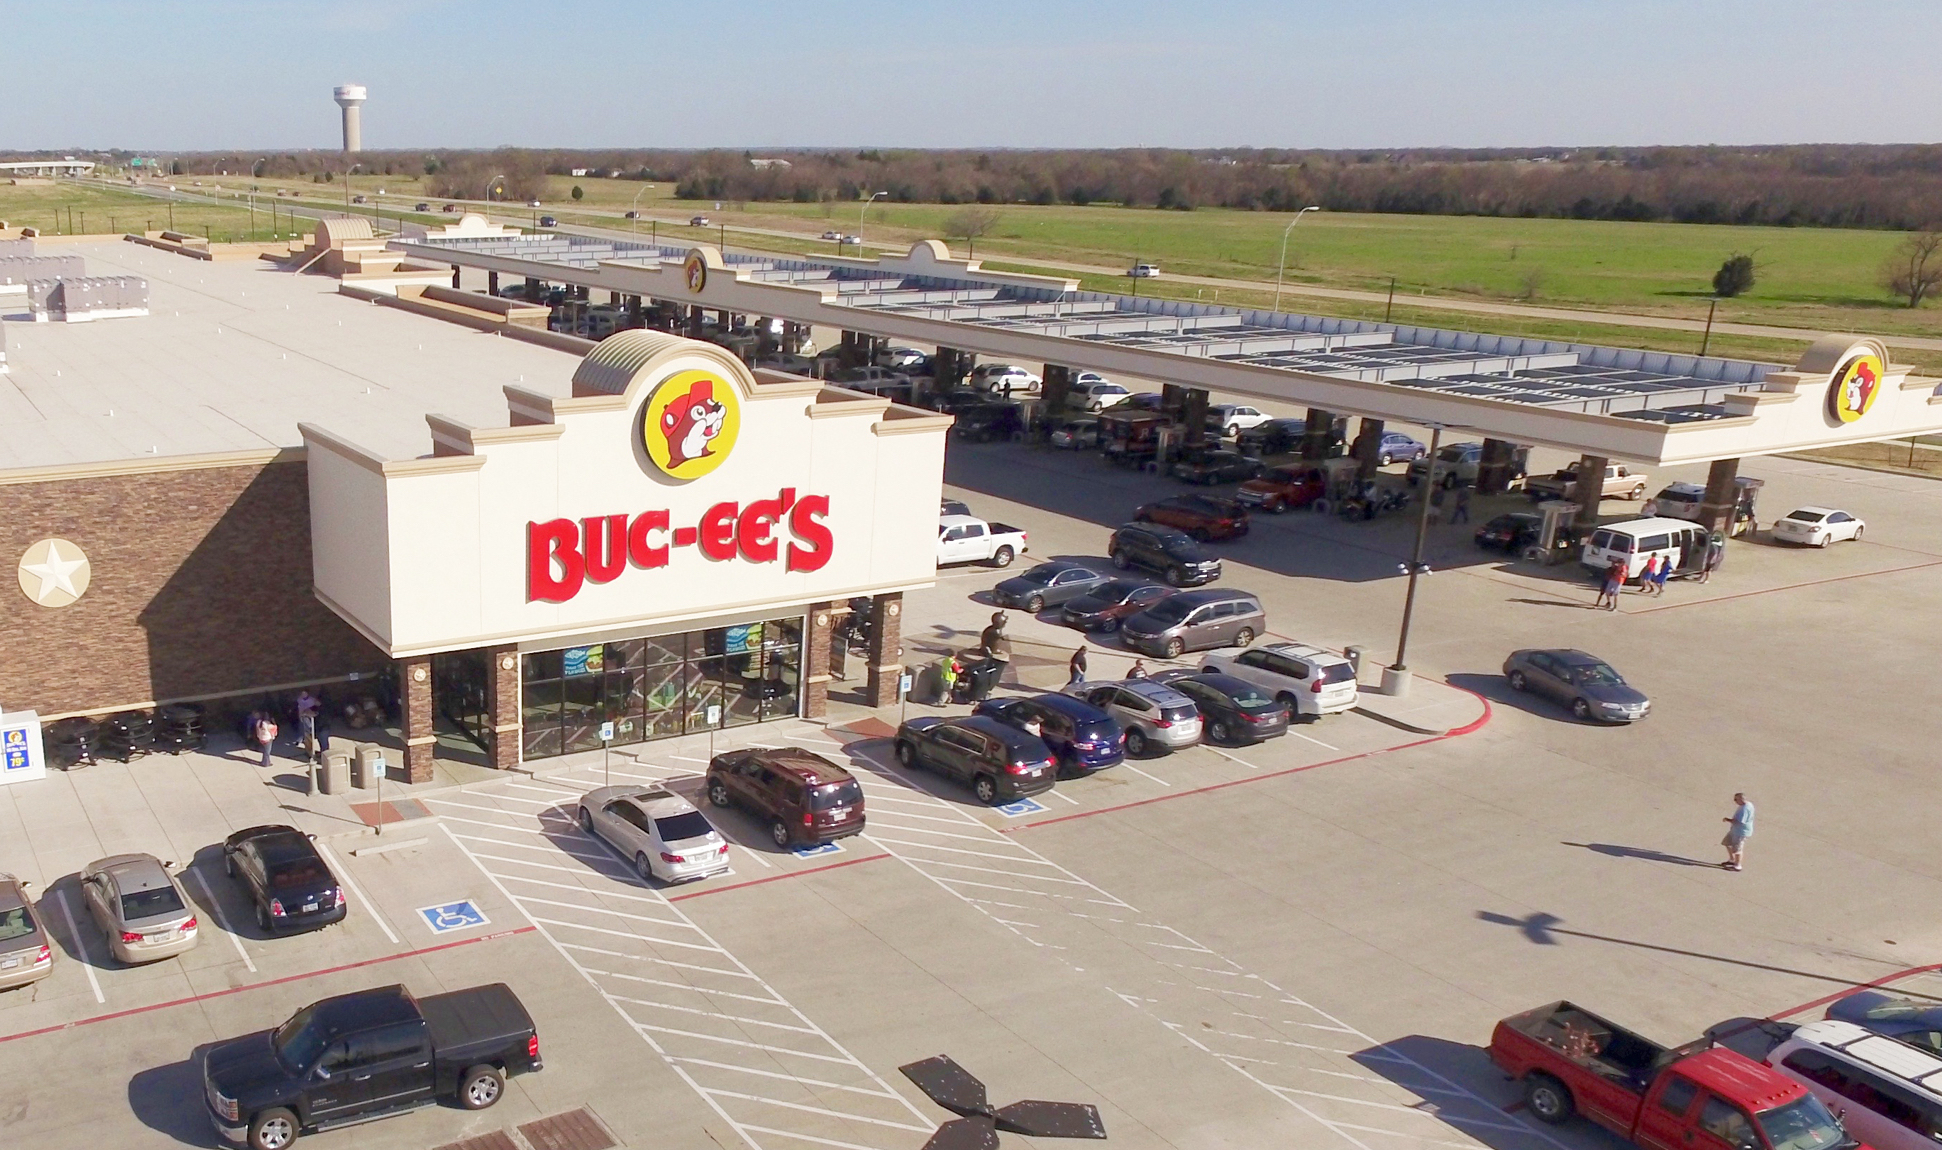 Buc-ee's Convenience store